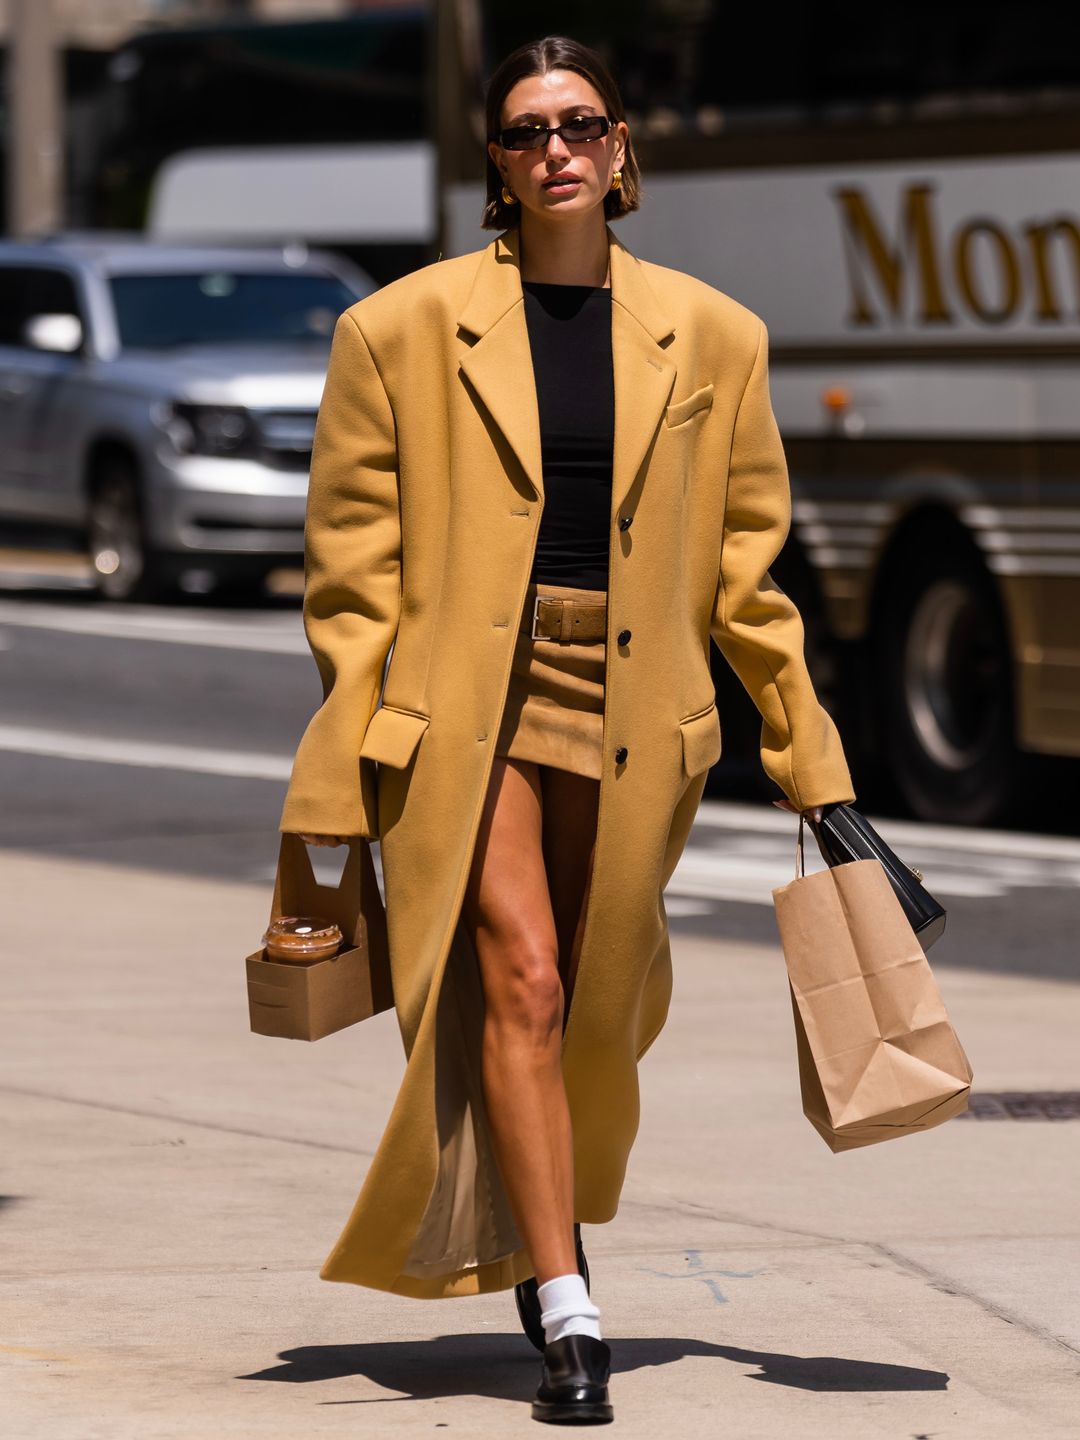 Hailey Bieber is seen in Tribeca on May 10, 2023 wearing a mustard coat with white socks and loafers